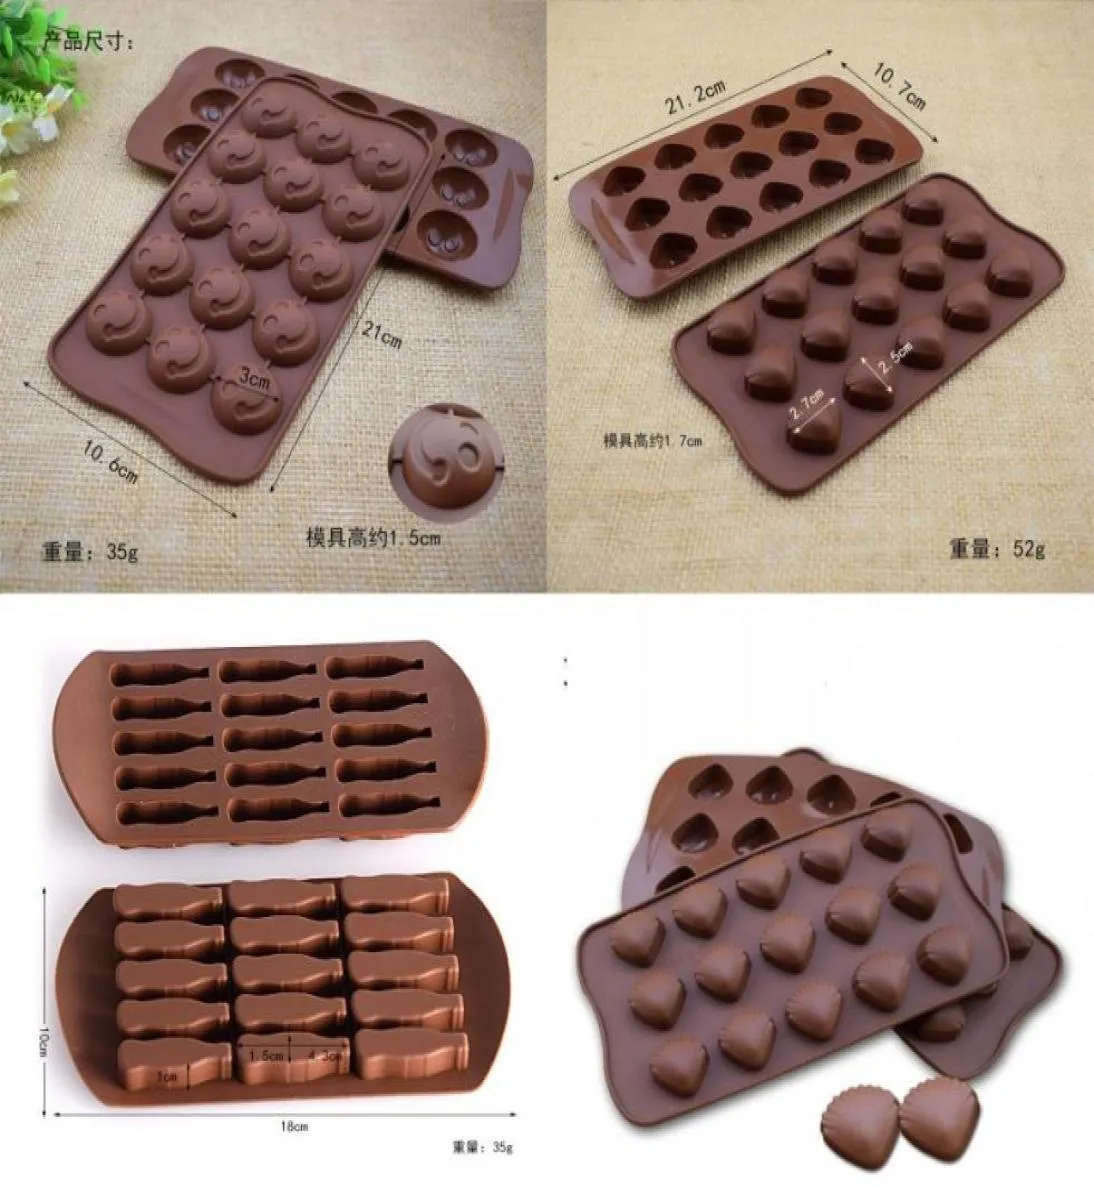 Diy Silicone Mould Smiling Face Shell Little Coke Mold Cake Chocolates Ice Lattice Molds Sell Well With Various Pattern 1 98jj J17419352